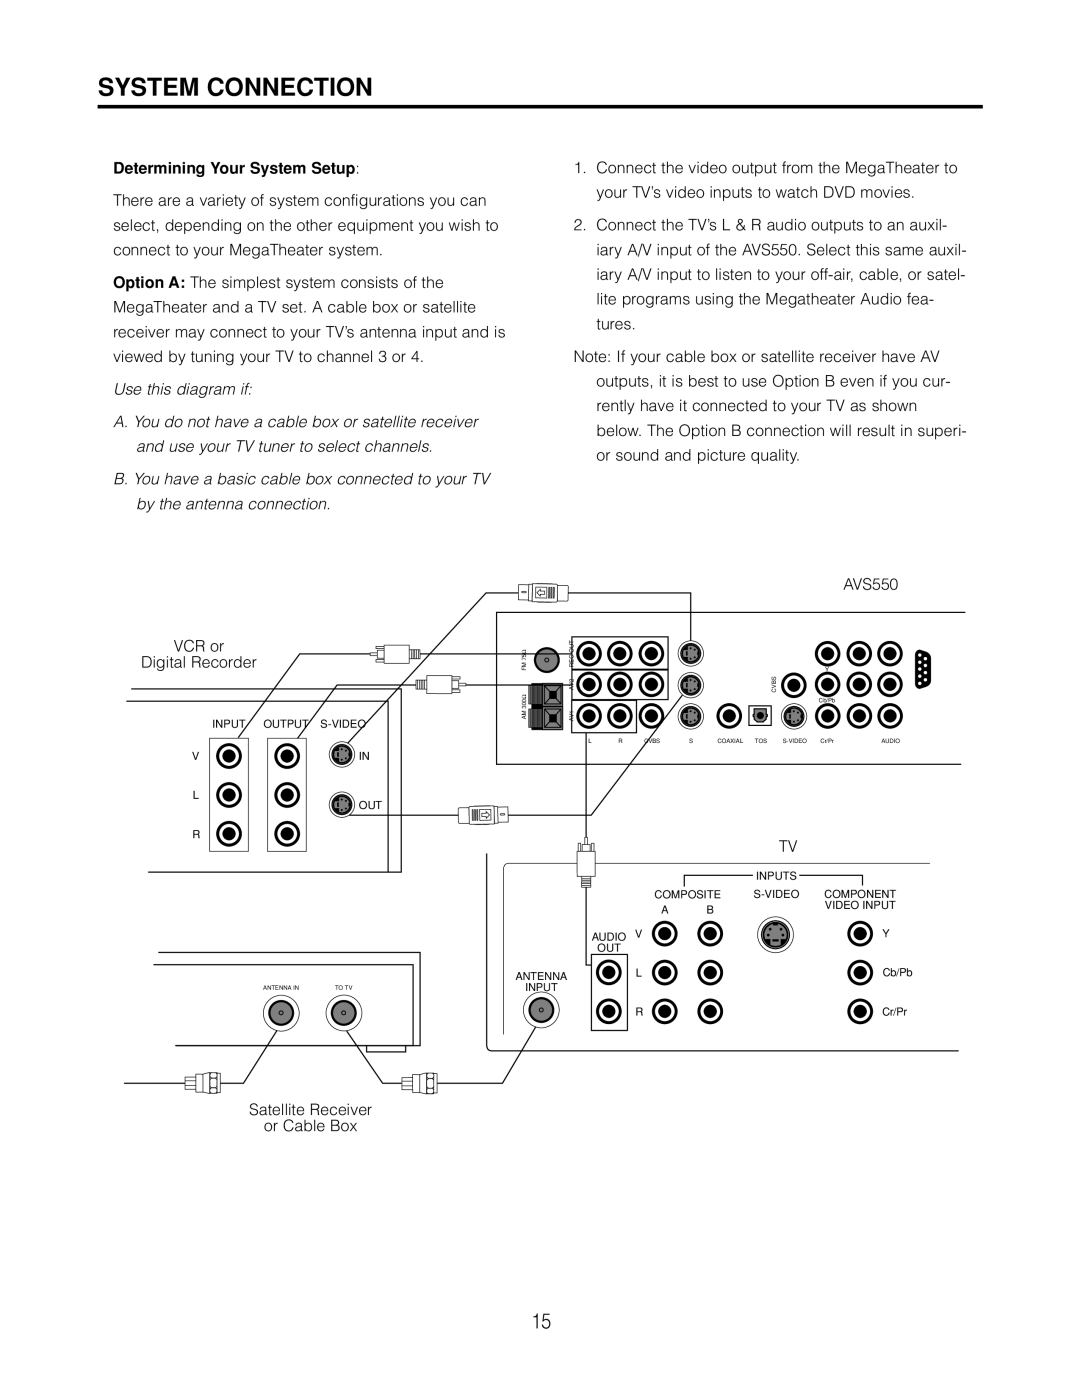 Cambridge SoundWorks AVS550 user manual System Connection, Determining Your System Setup, Use this diagram if 